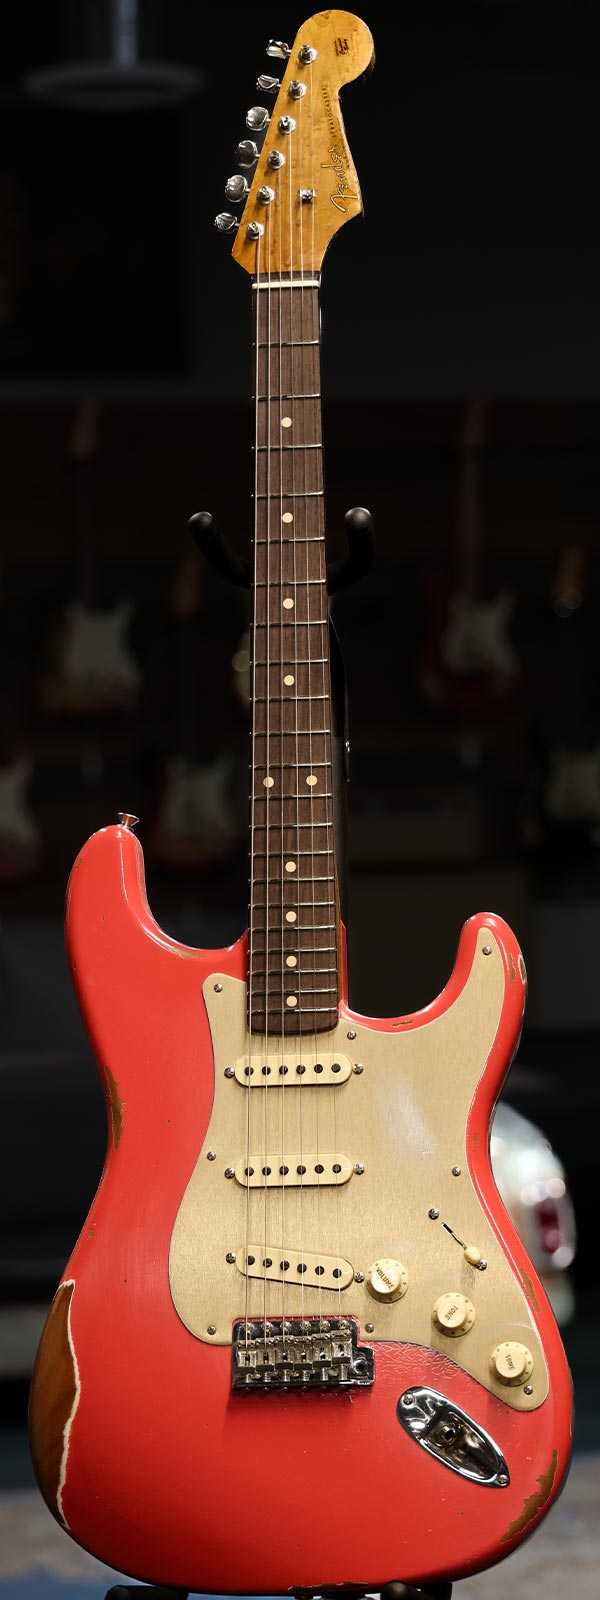 Fender Custom Shop 1960 Roasted Relic Stratocaster Fiesta Red CZ567447